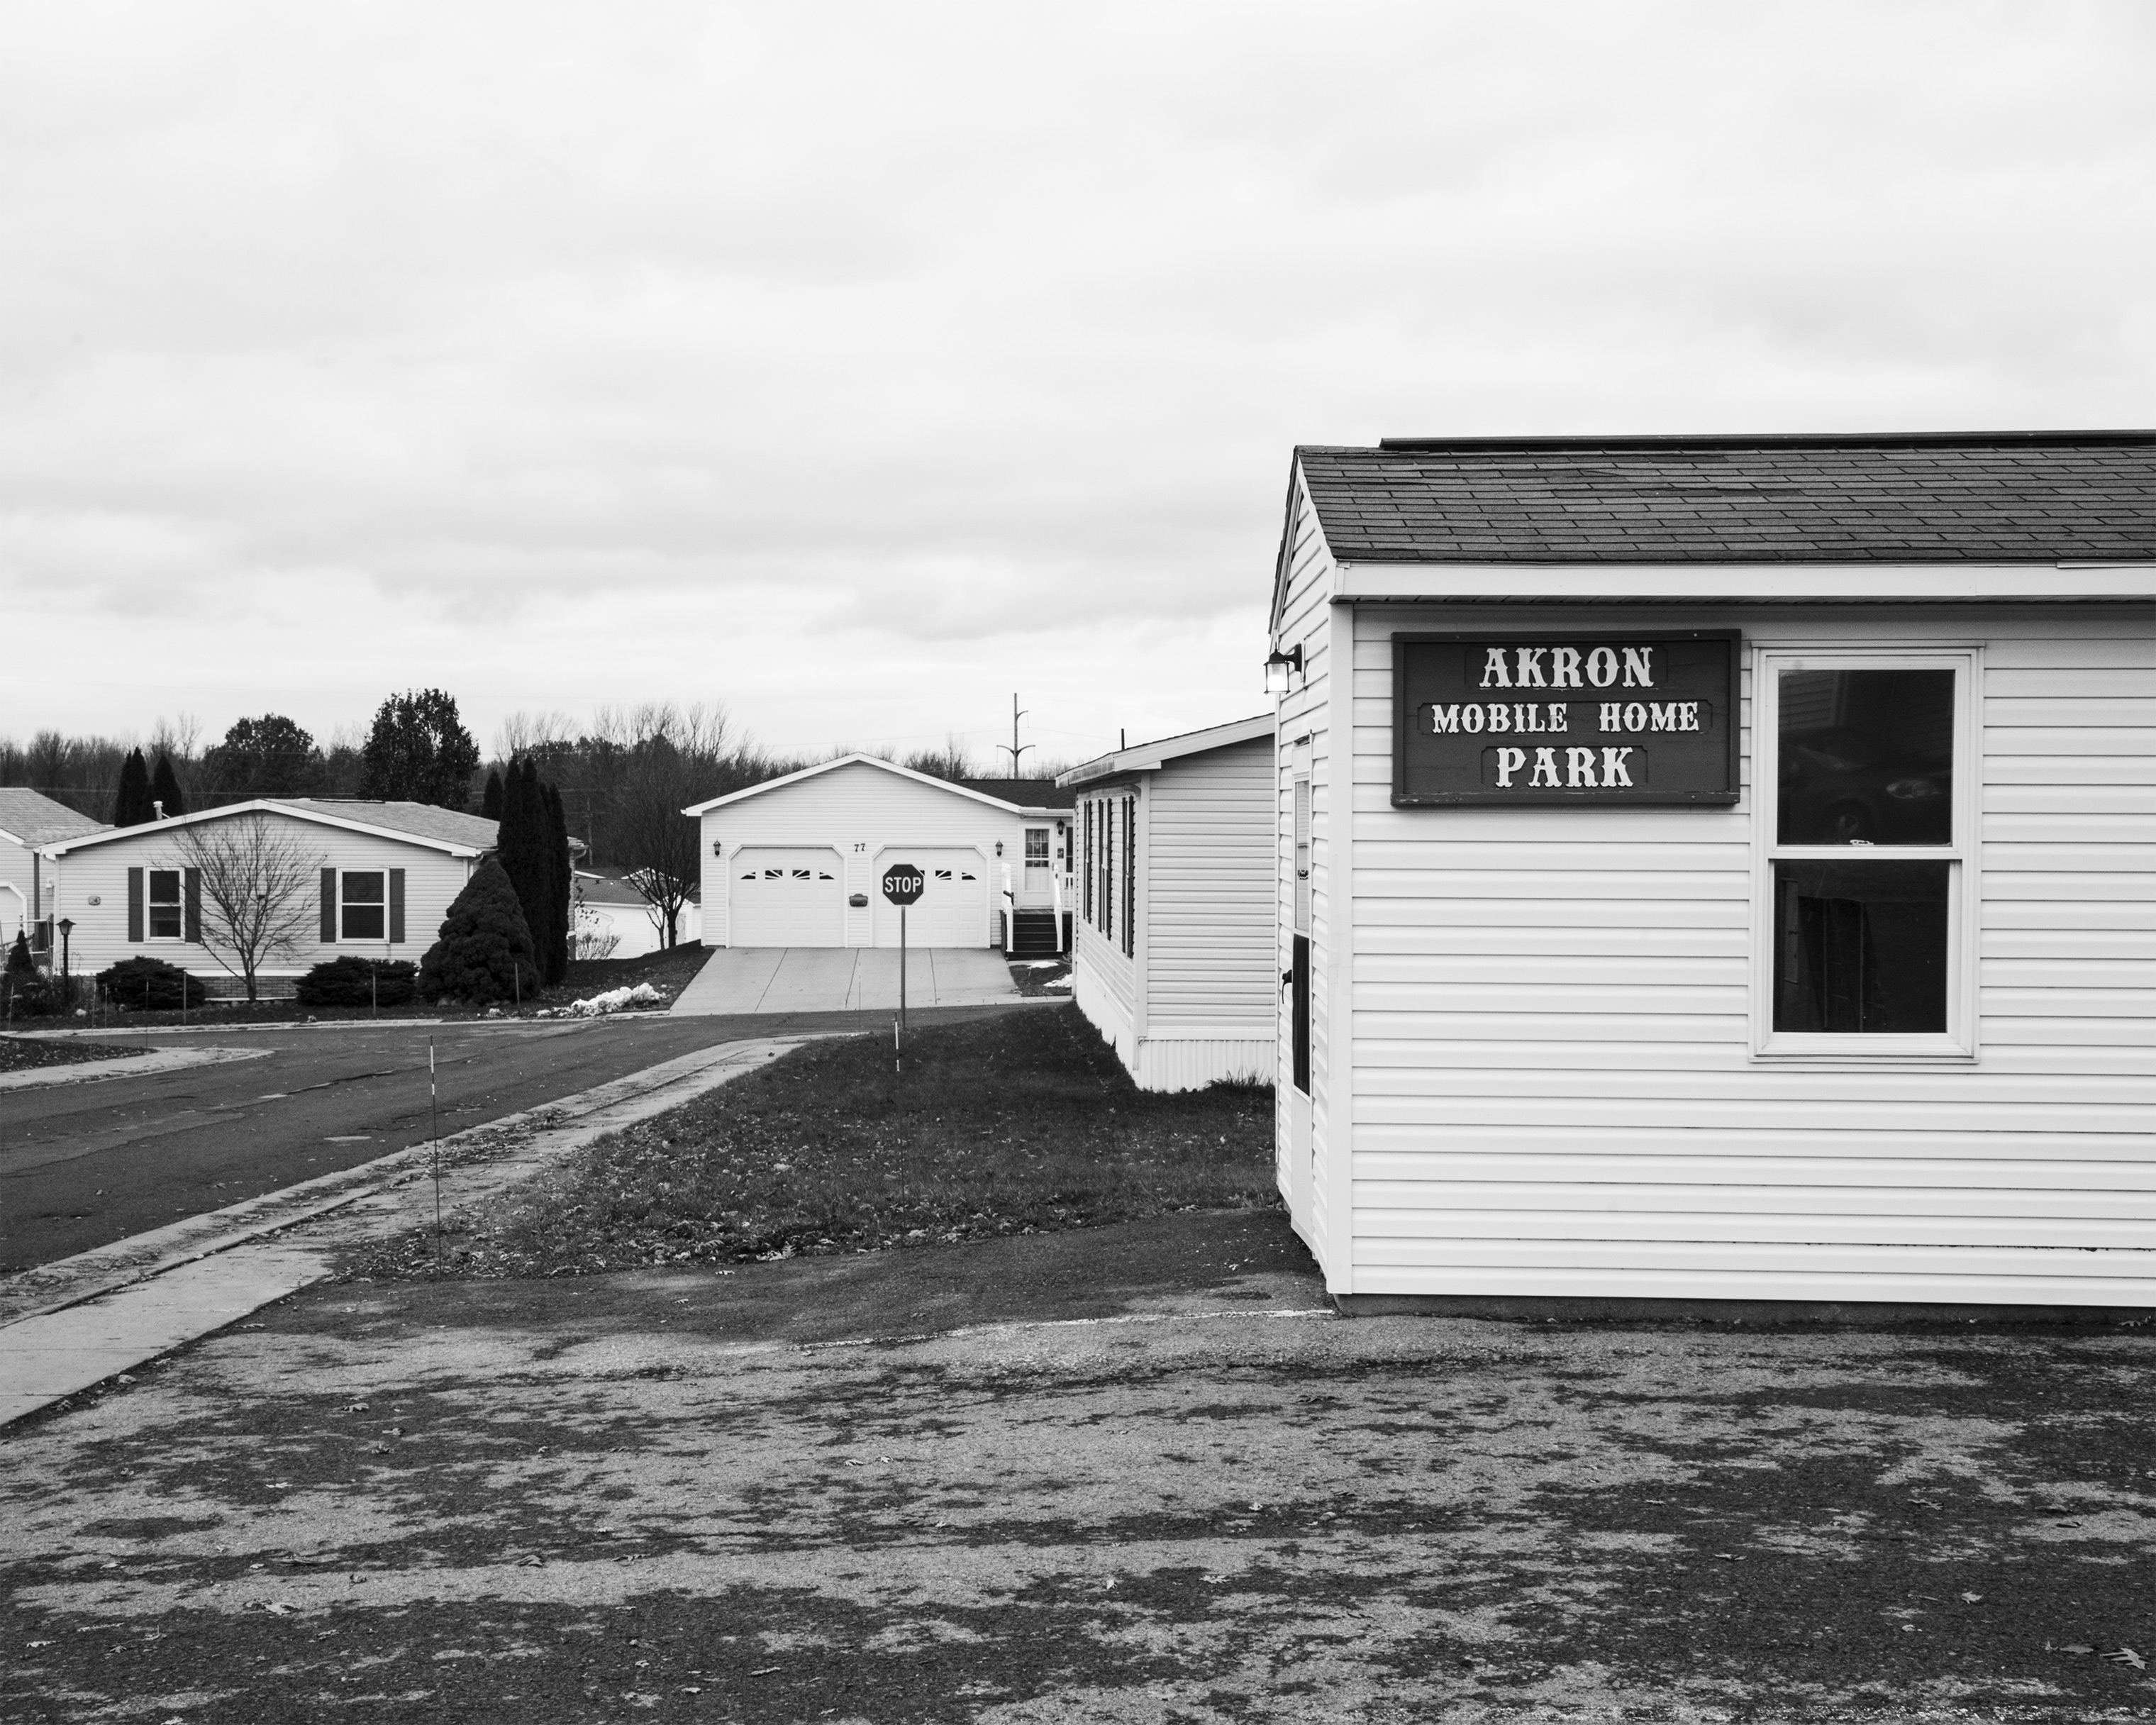 The entrance to the Akron Manufactured Home Community (Shane Lavalette for TIME)